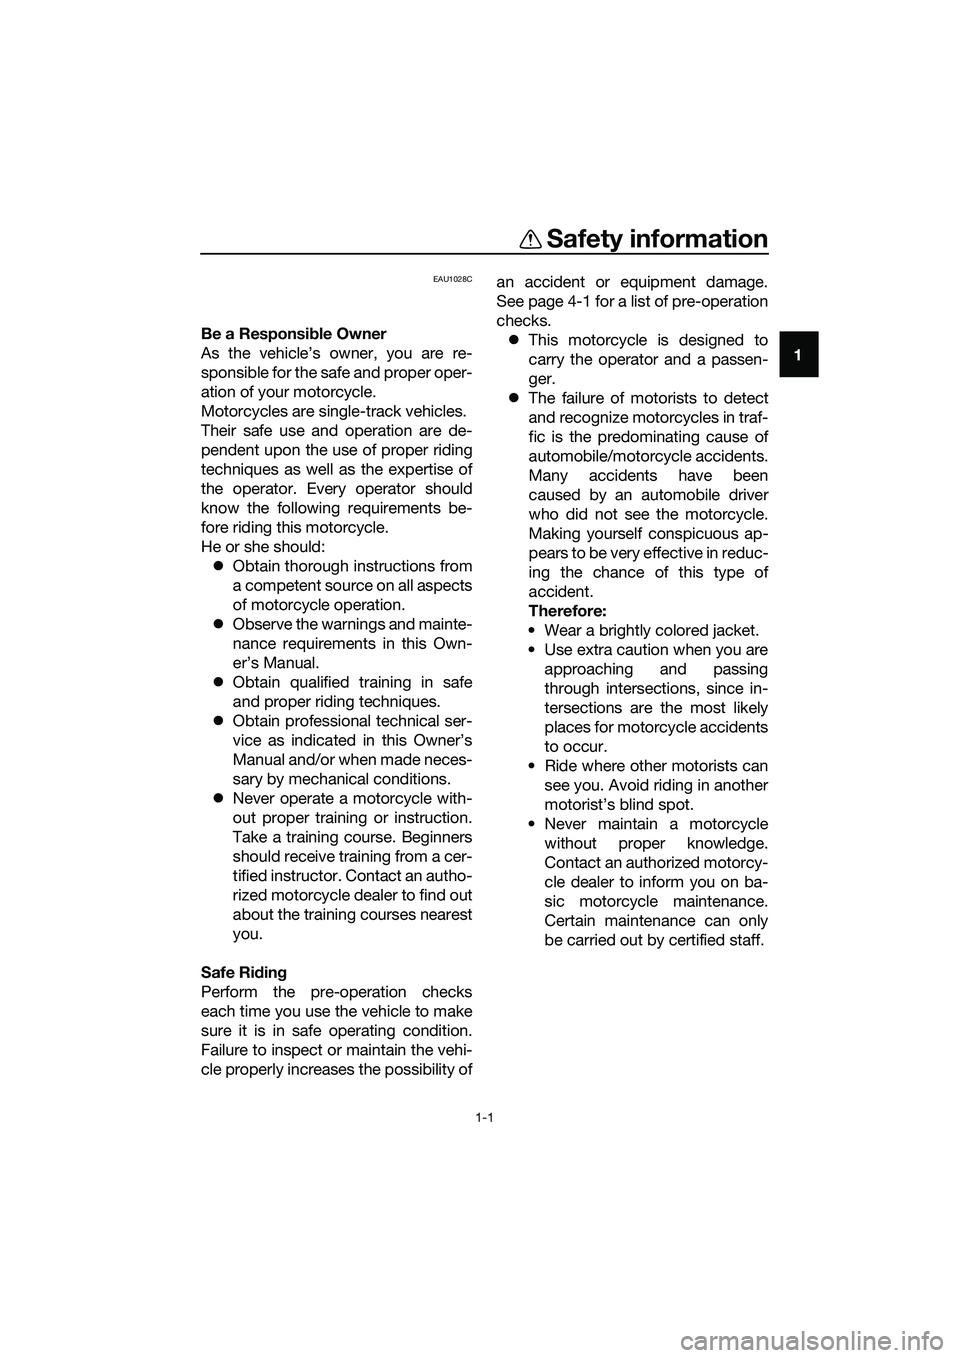 YAMAHA MT-03 2020  Owners Manual 1-1
1
Safety information
EAU1028C
Be a Responsible Owner
As the vehicle’s owner, you are re-
sponsible for the safe and proper oper-
ation of your motorcycle.
Motorcycles are single-track vehicles.
